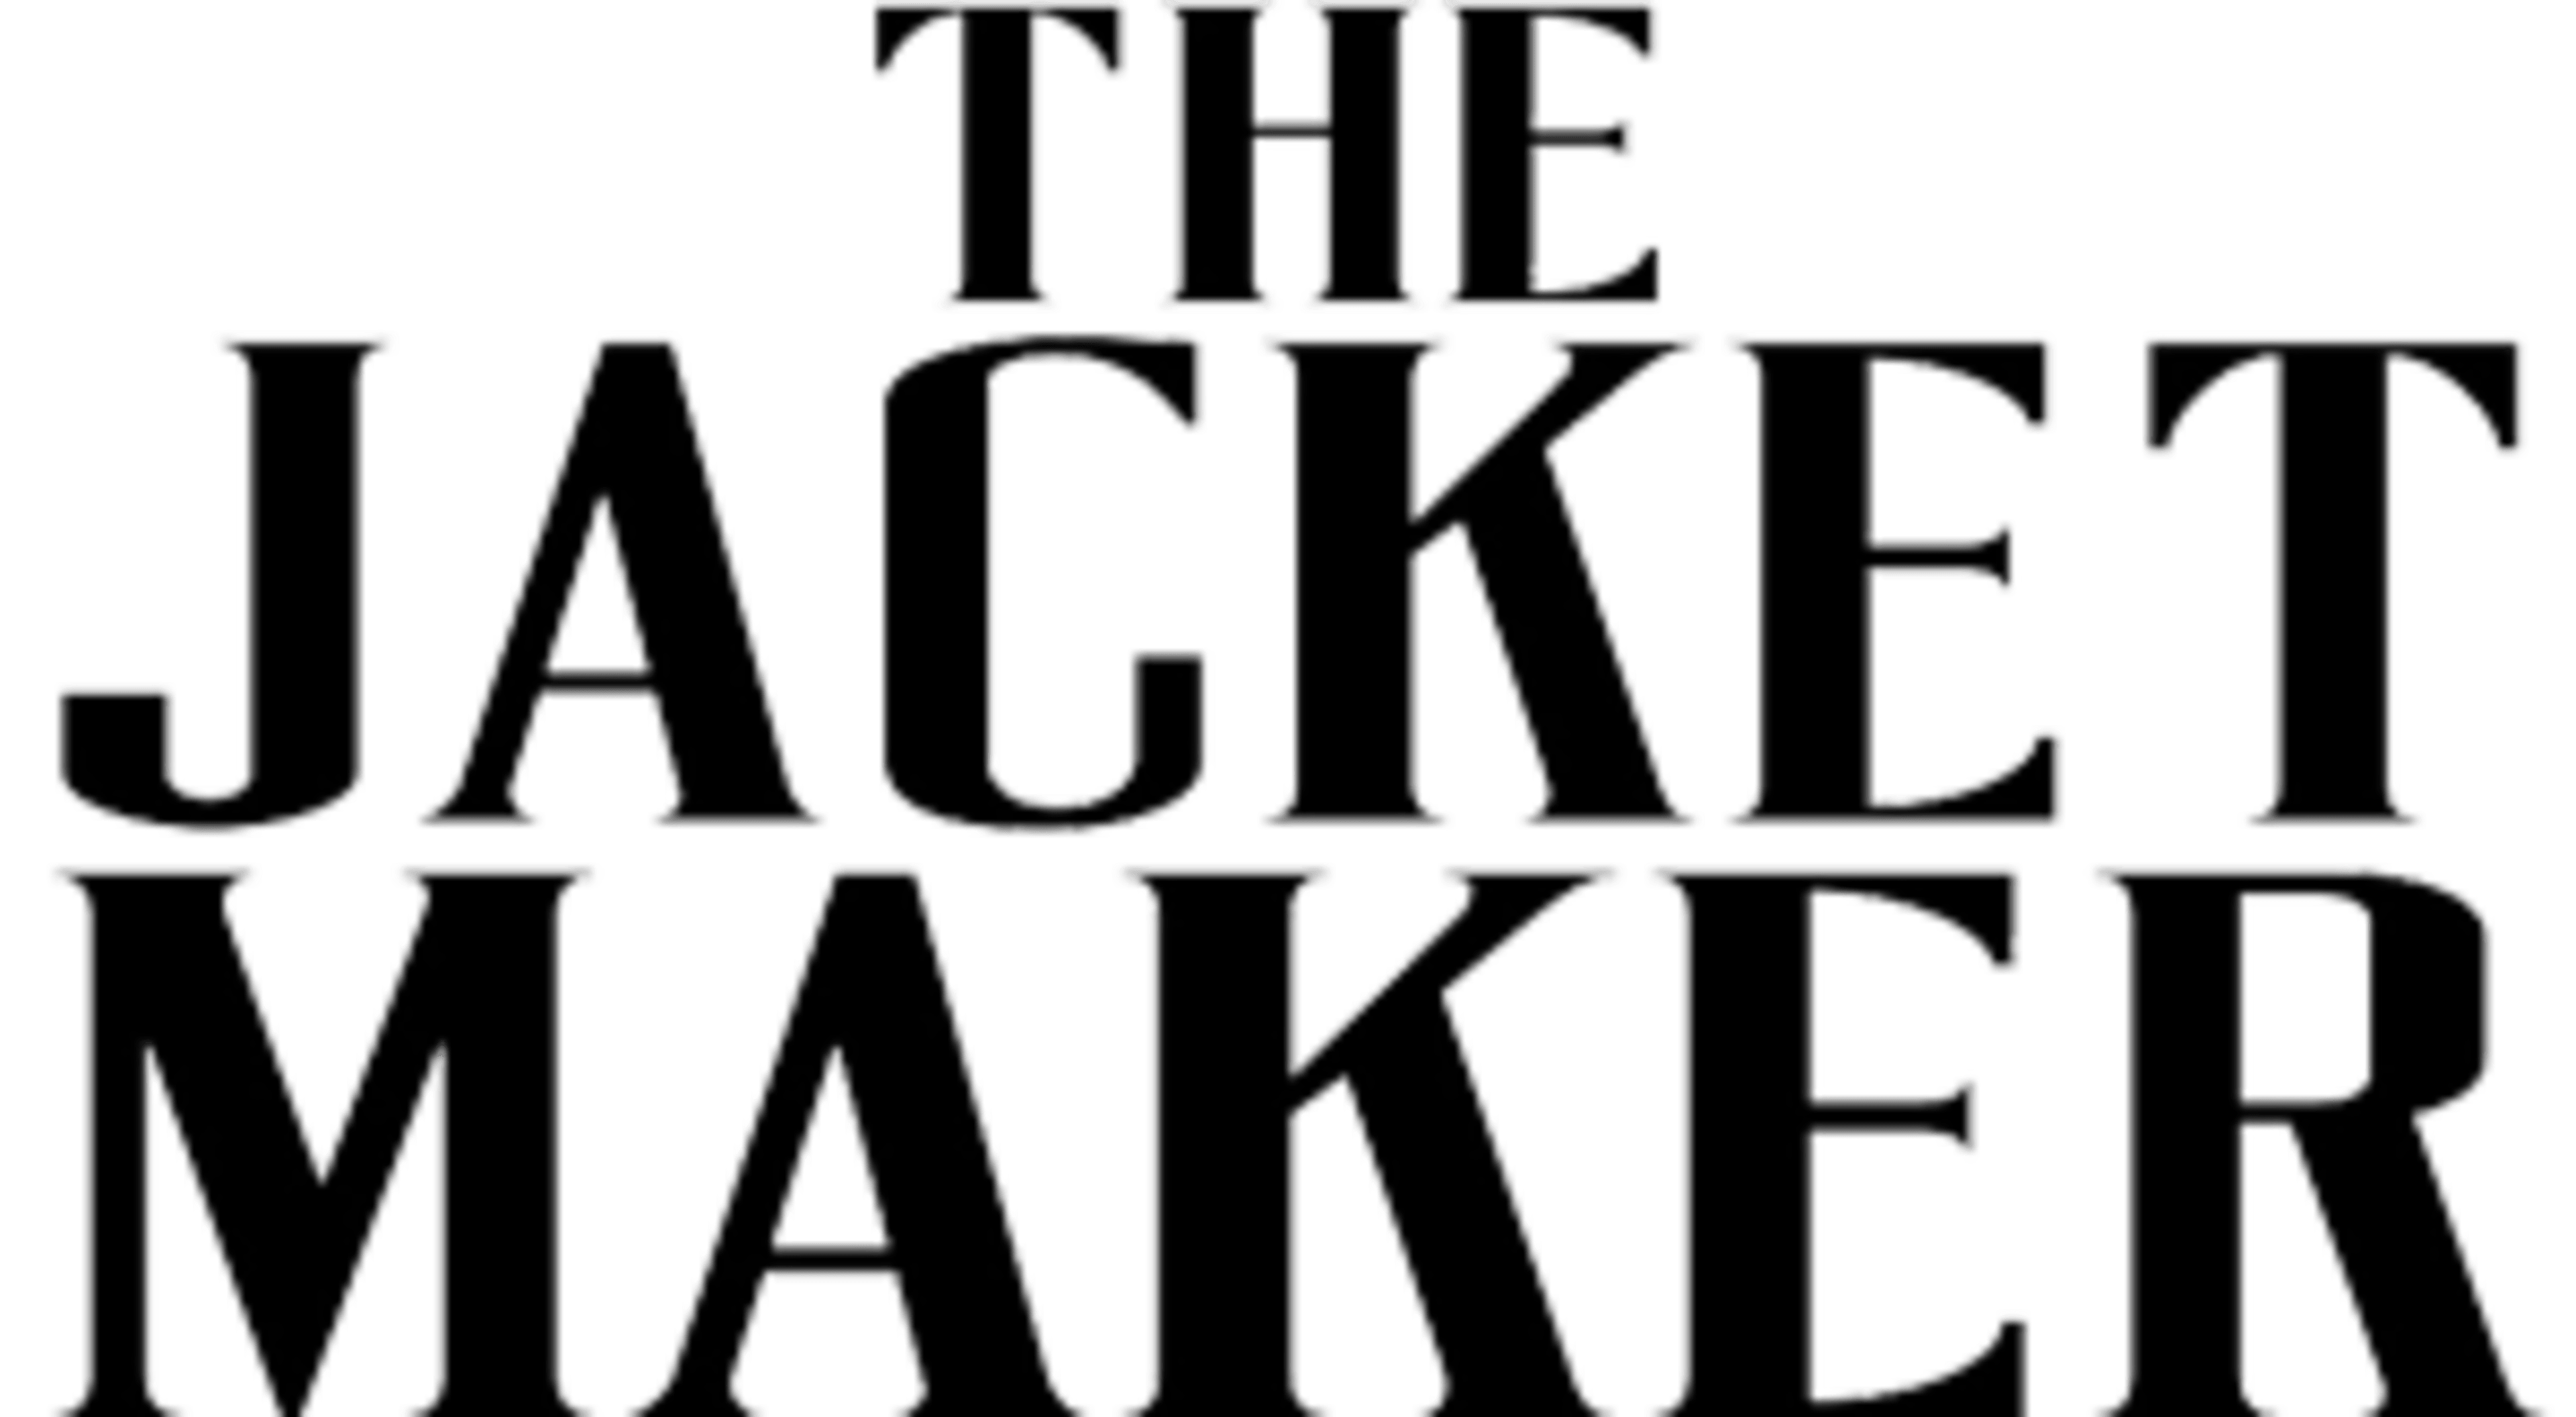 The Jacket MakerCode